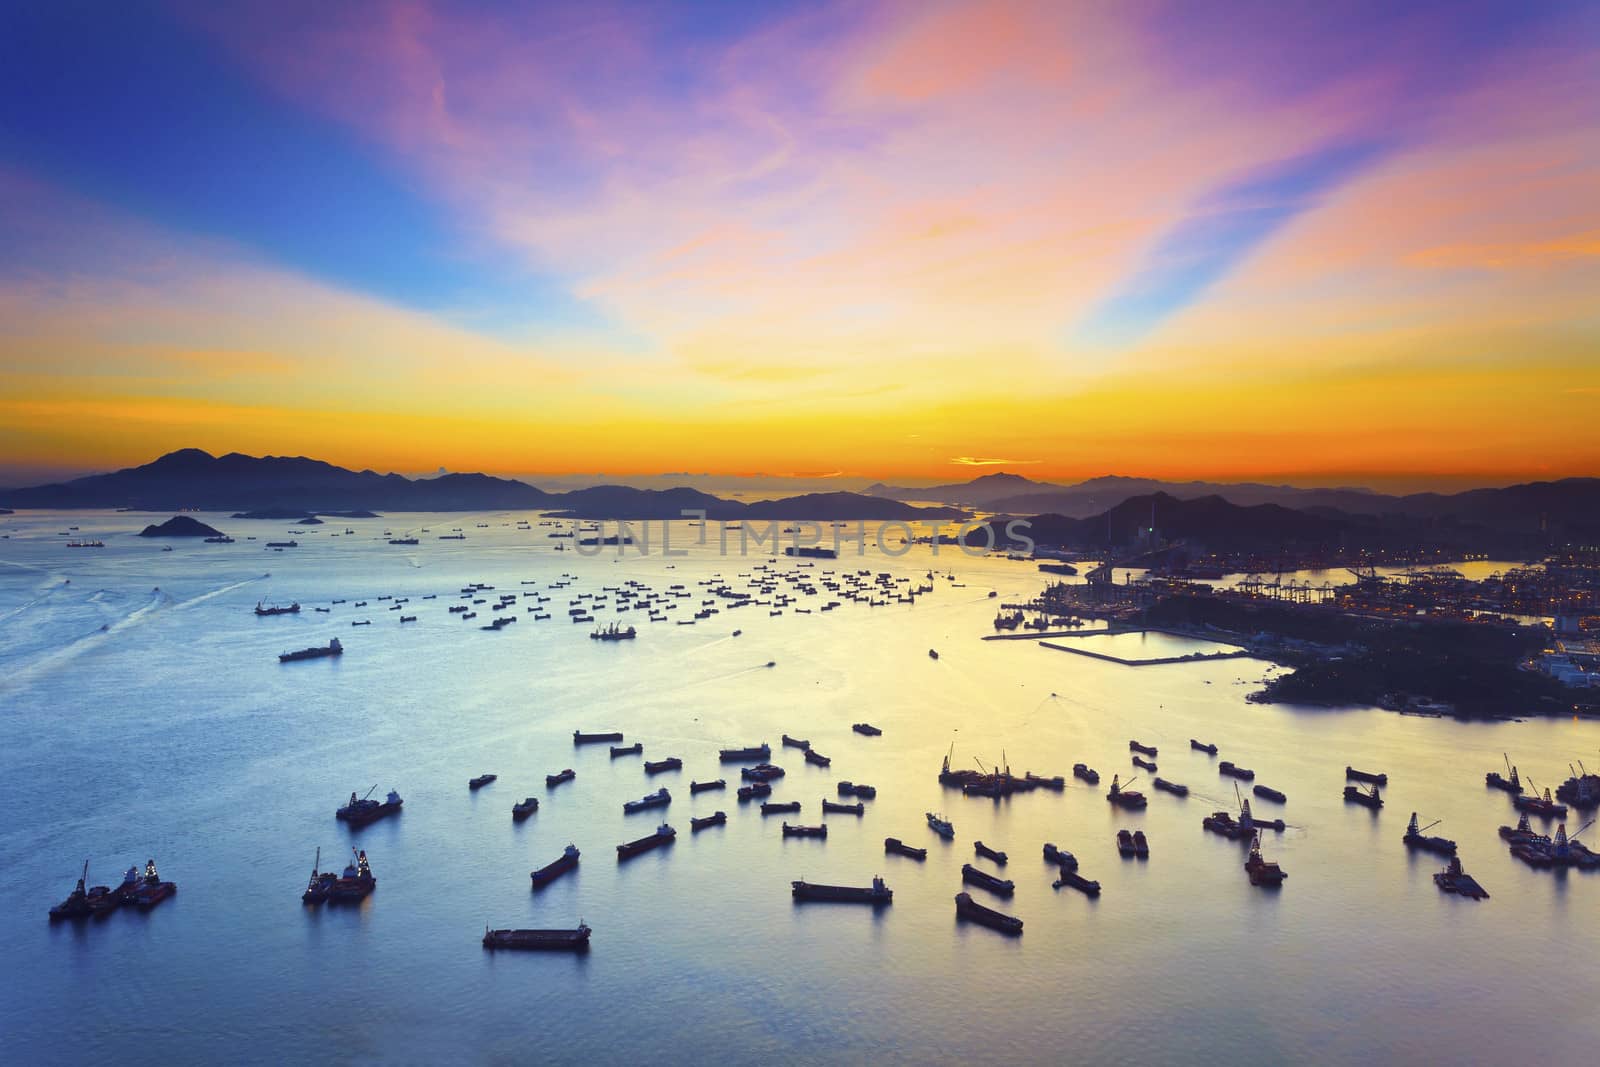 Sunset over the sea in Hong Kong